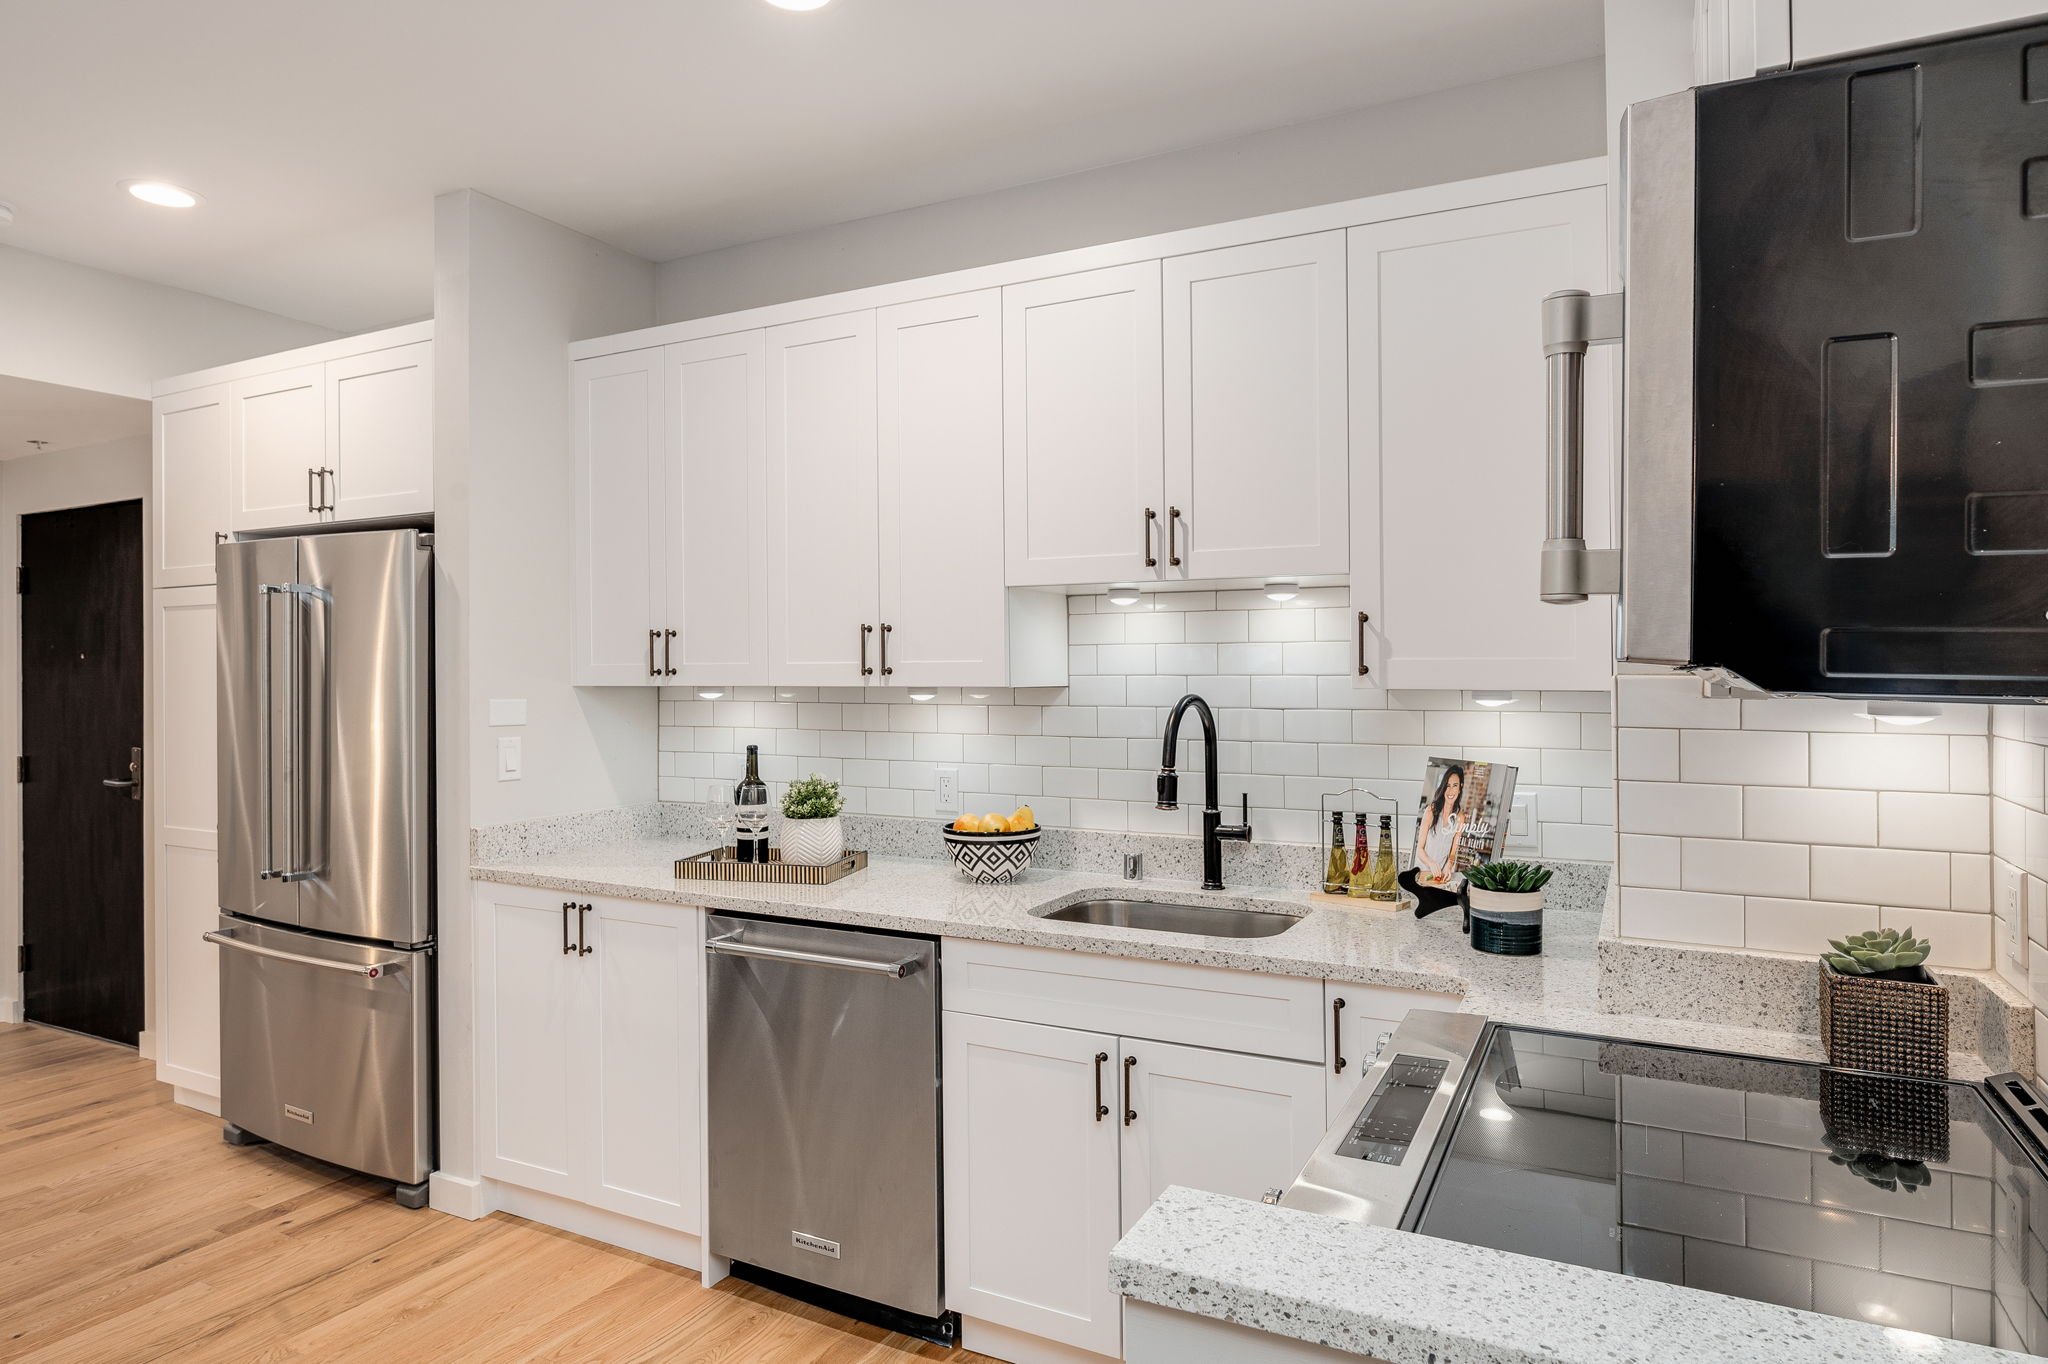  view of white kitchen with quartz countertops, hardwood floors, and cabinet space 